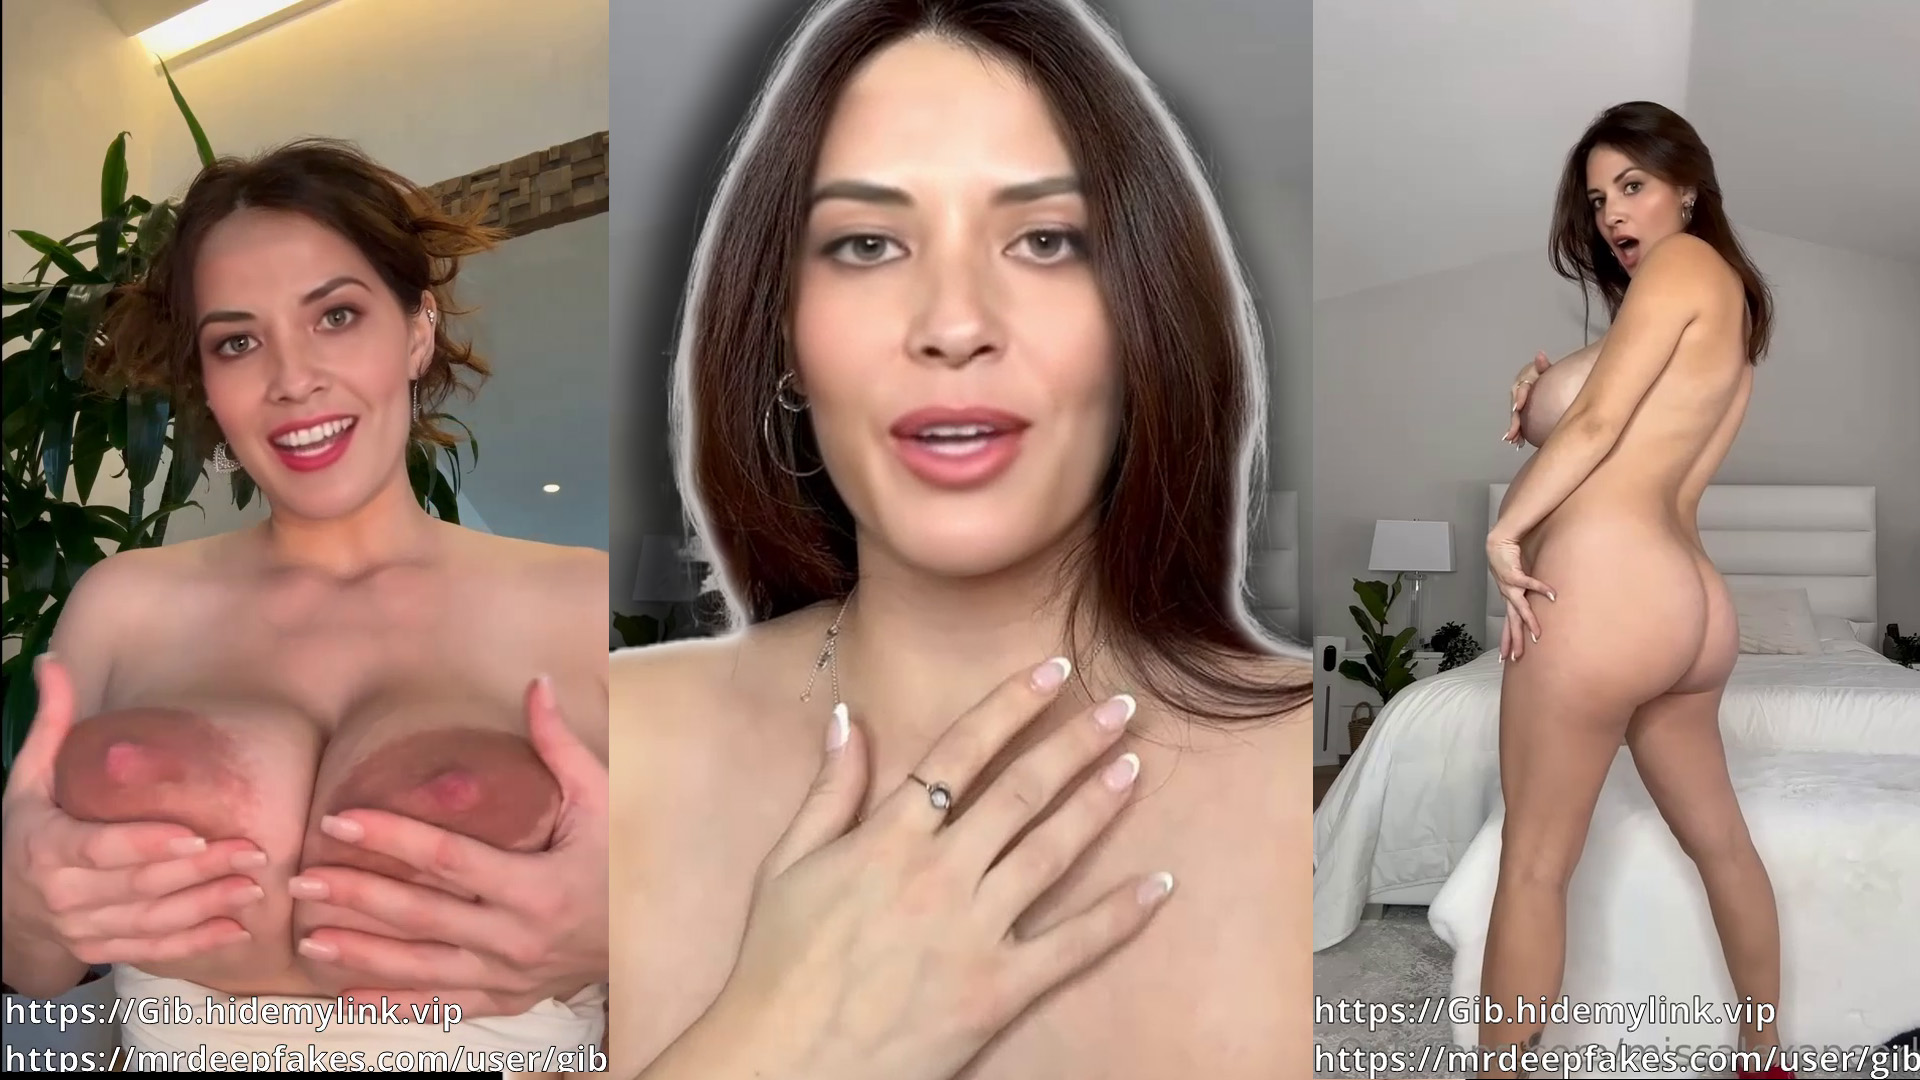 Olivia Munn's Glorious Tits Revived From The Dead!